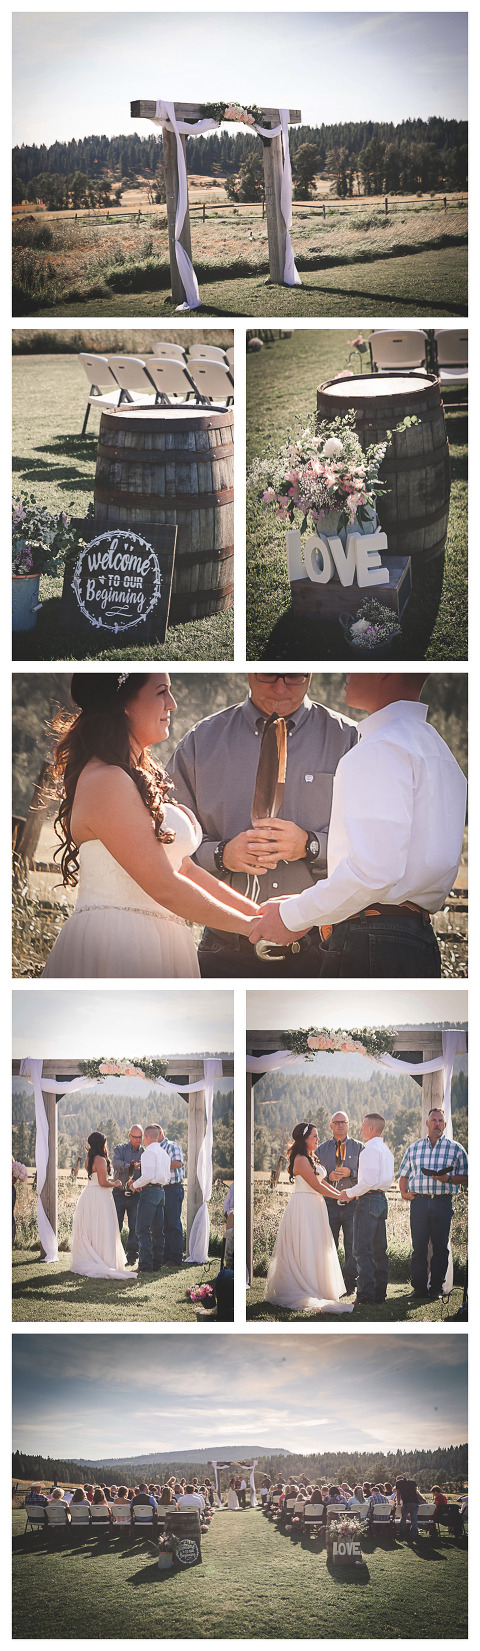 western wedding at the cattle barn in Cle Elum Wa photography by Hailey Haberman 